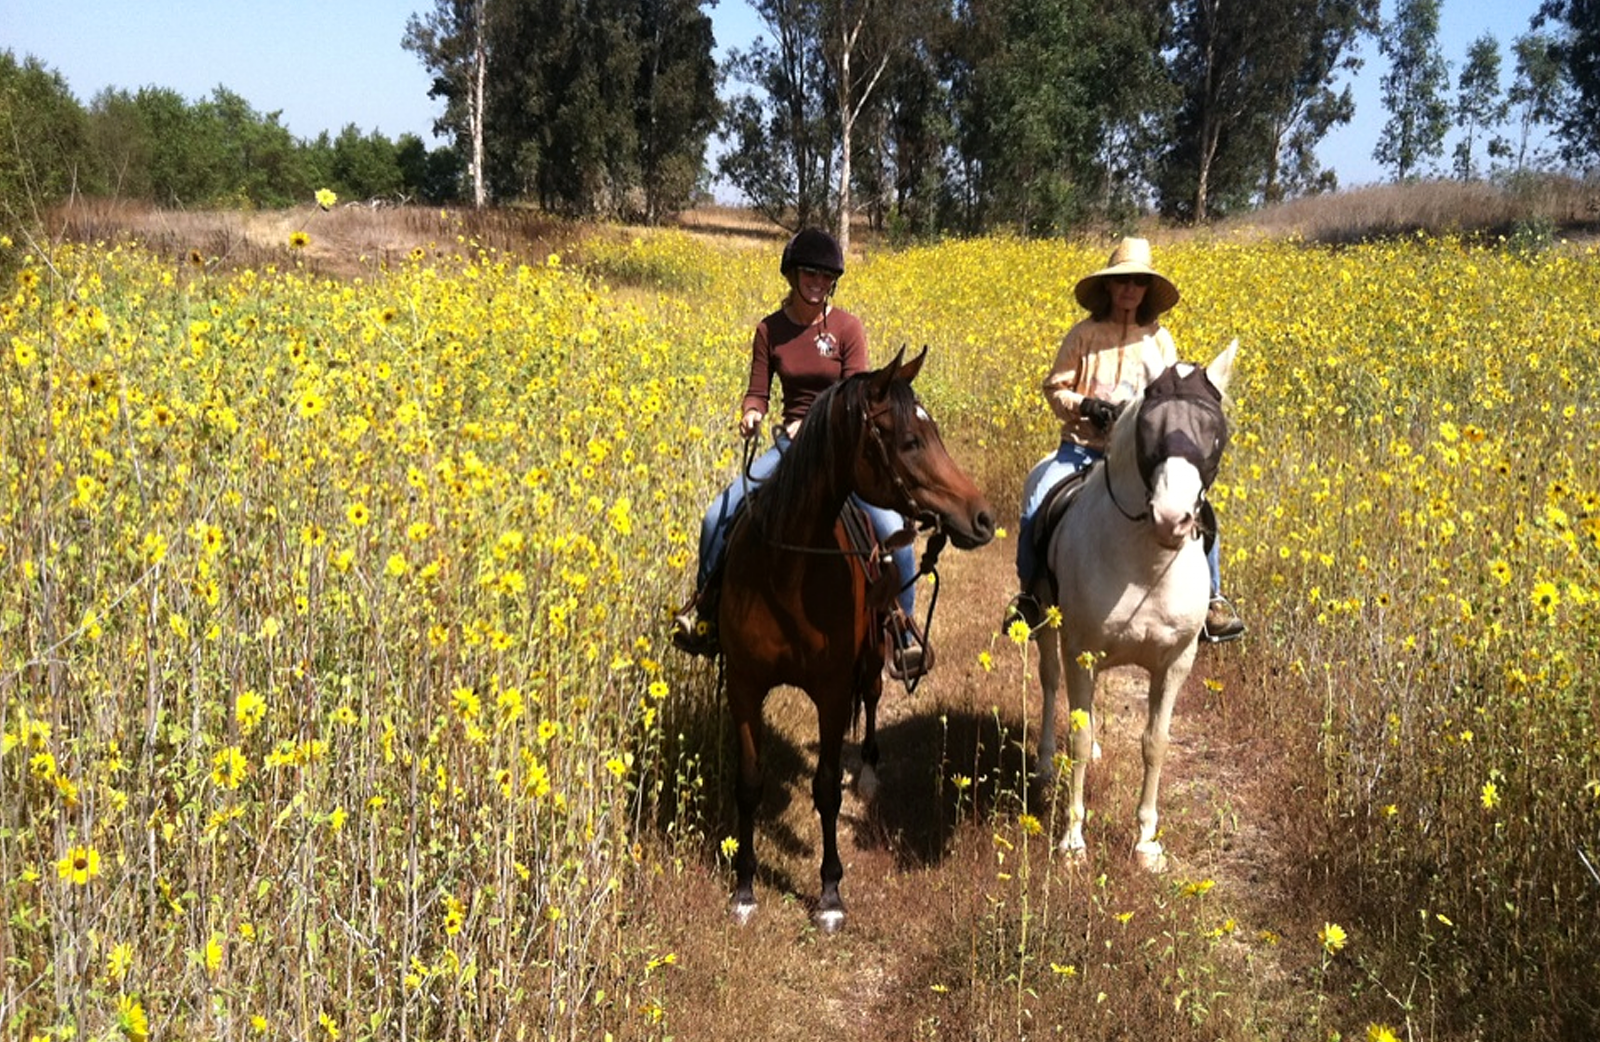 Two women ride on horseback in a field of yellow flowers at Prado park.